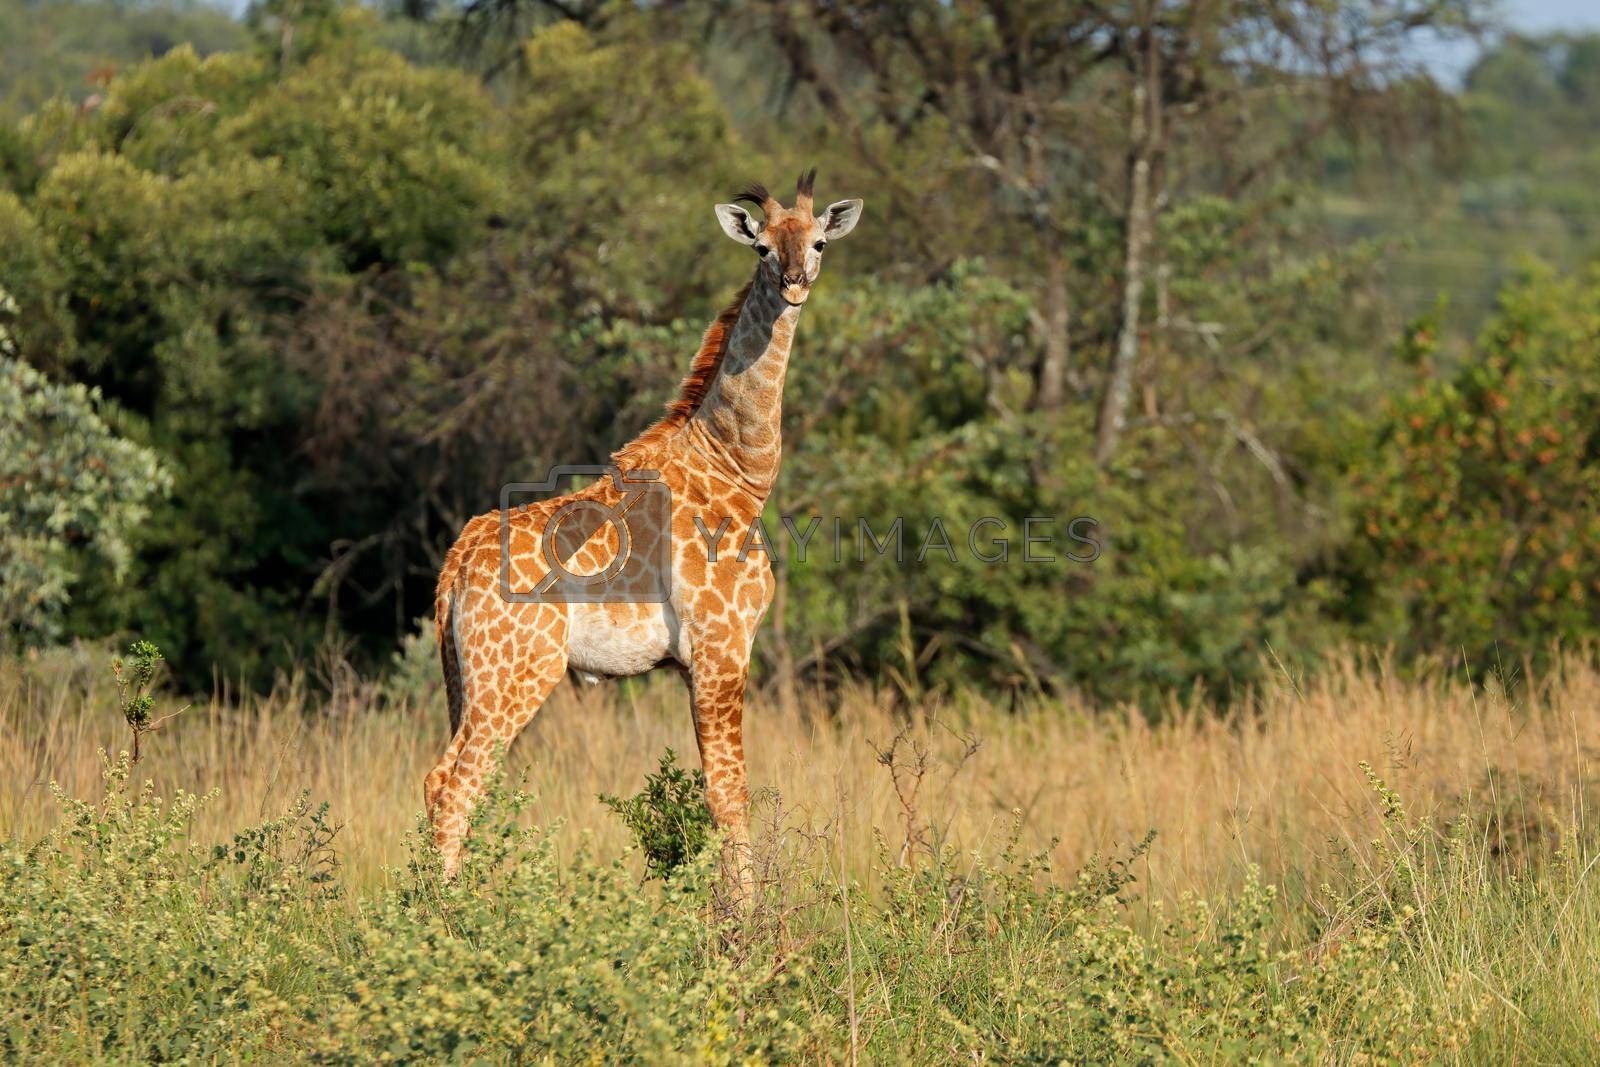 Royalty free image of Young giraffe in natural habitat by EcoPic